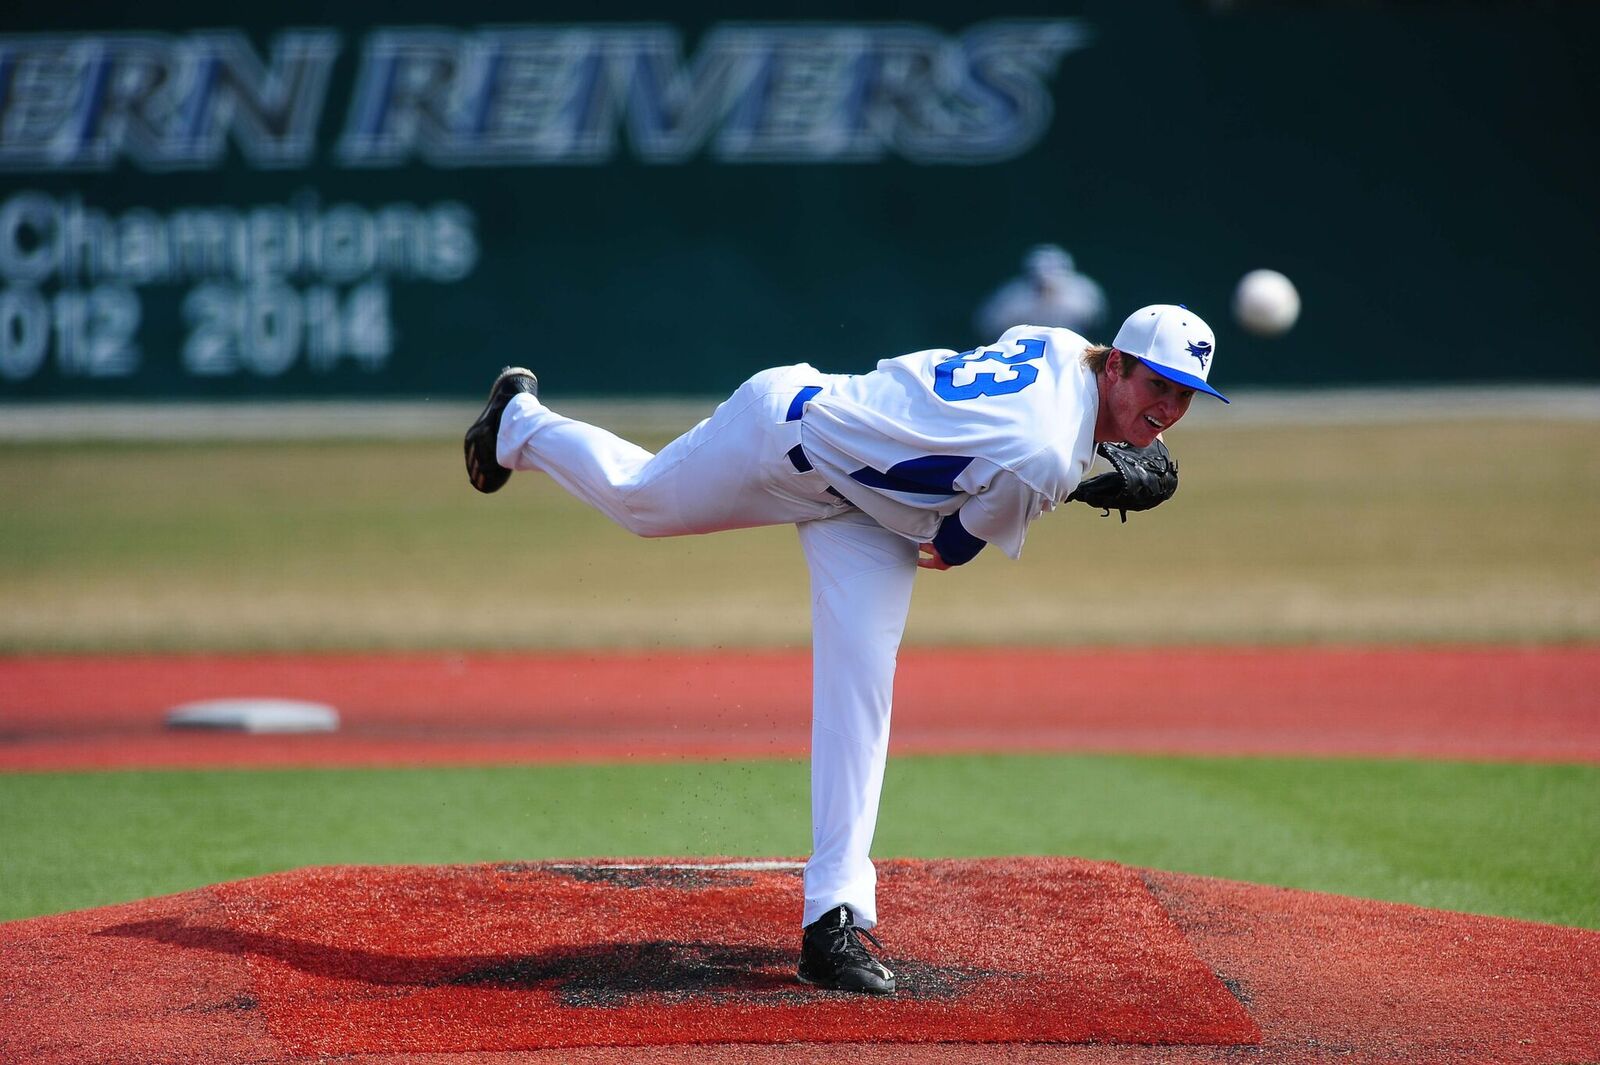 Reivers Win 5 Games in 3 Days, Move to 43-5